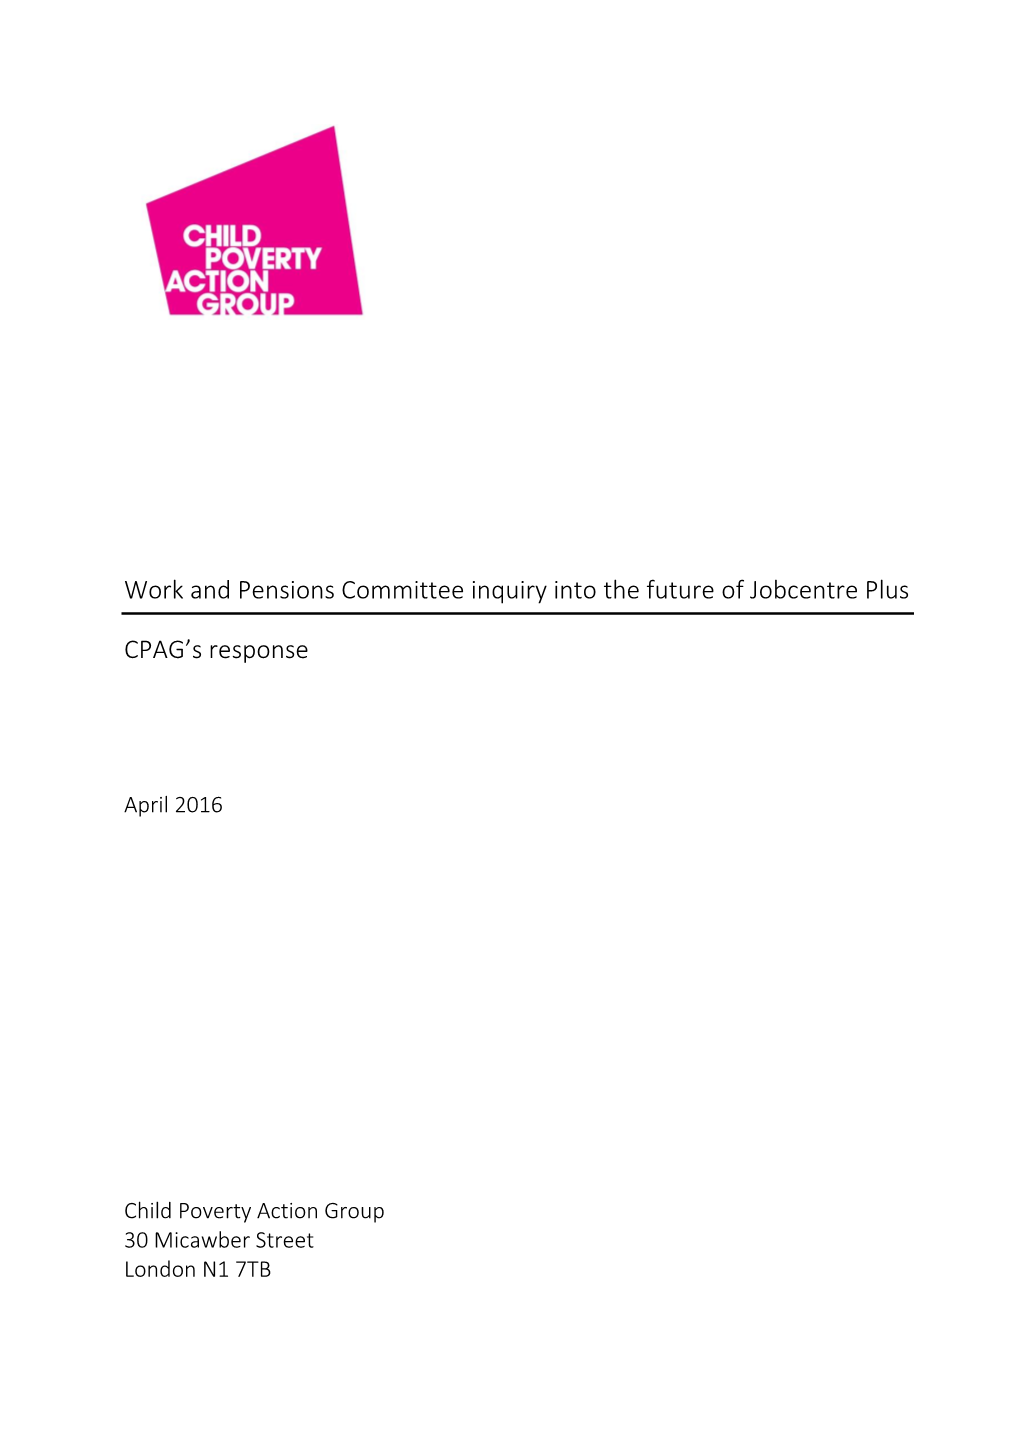 Work and Pensions Committee Inquiry Into the Future of Jobcentre Plus